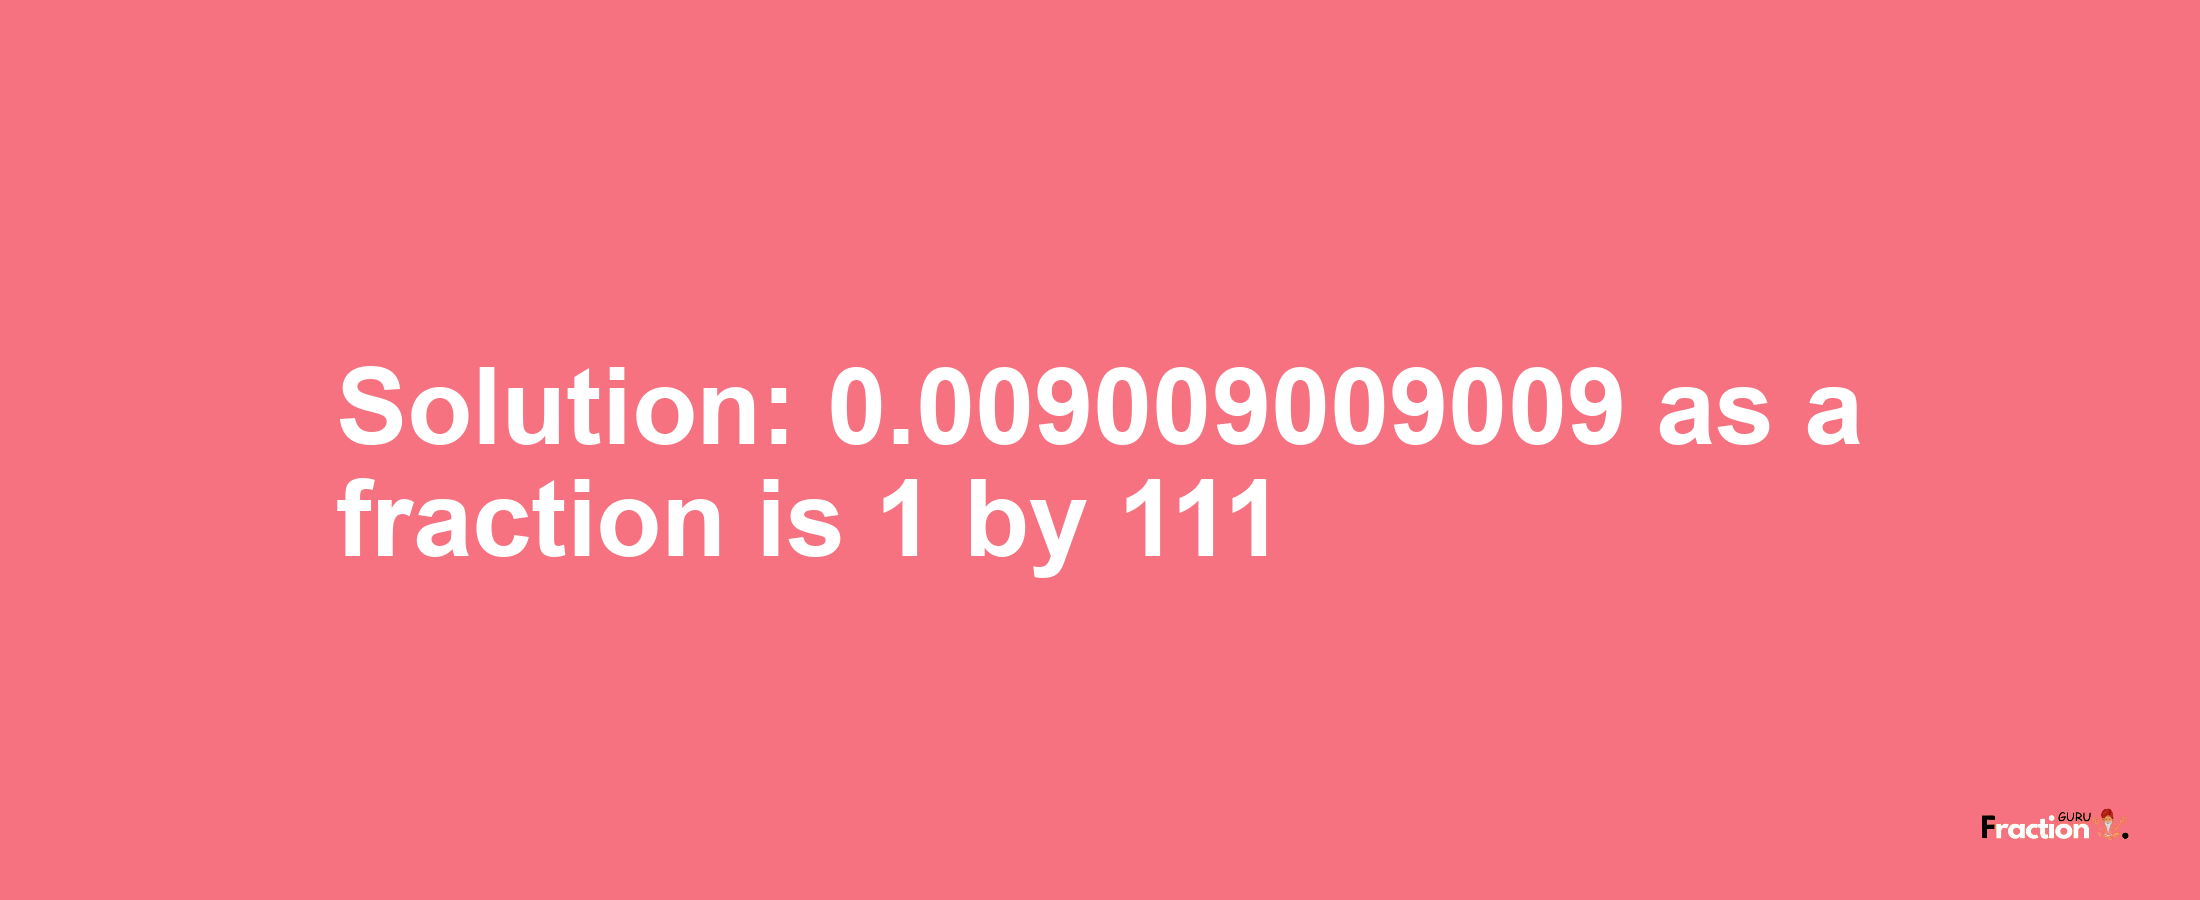 Solution:0.009009009009 as a fraction is 1/111